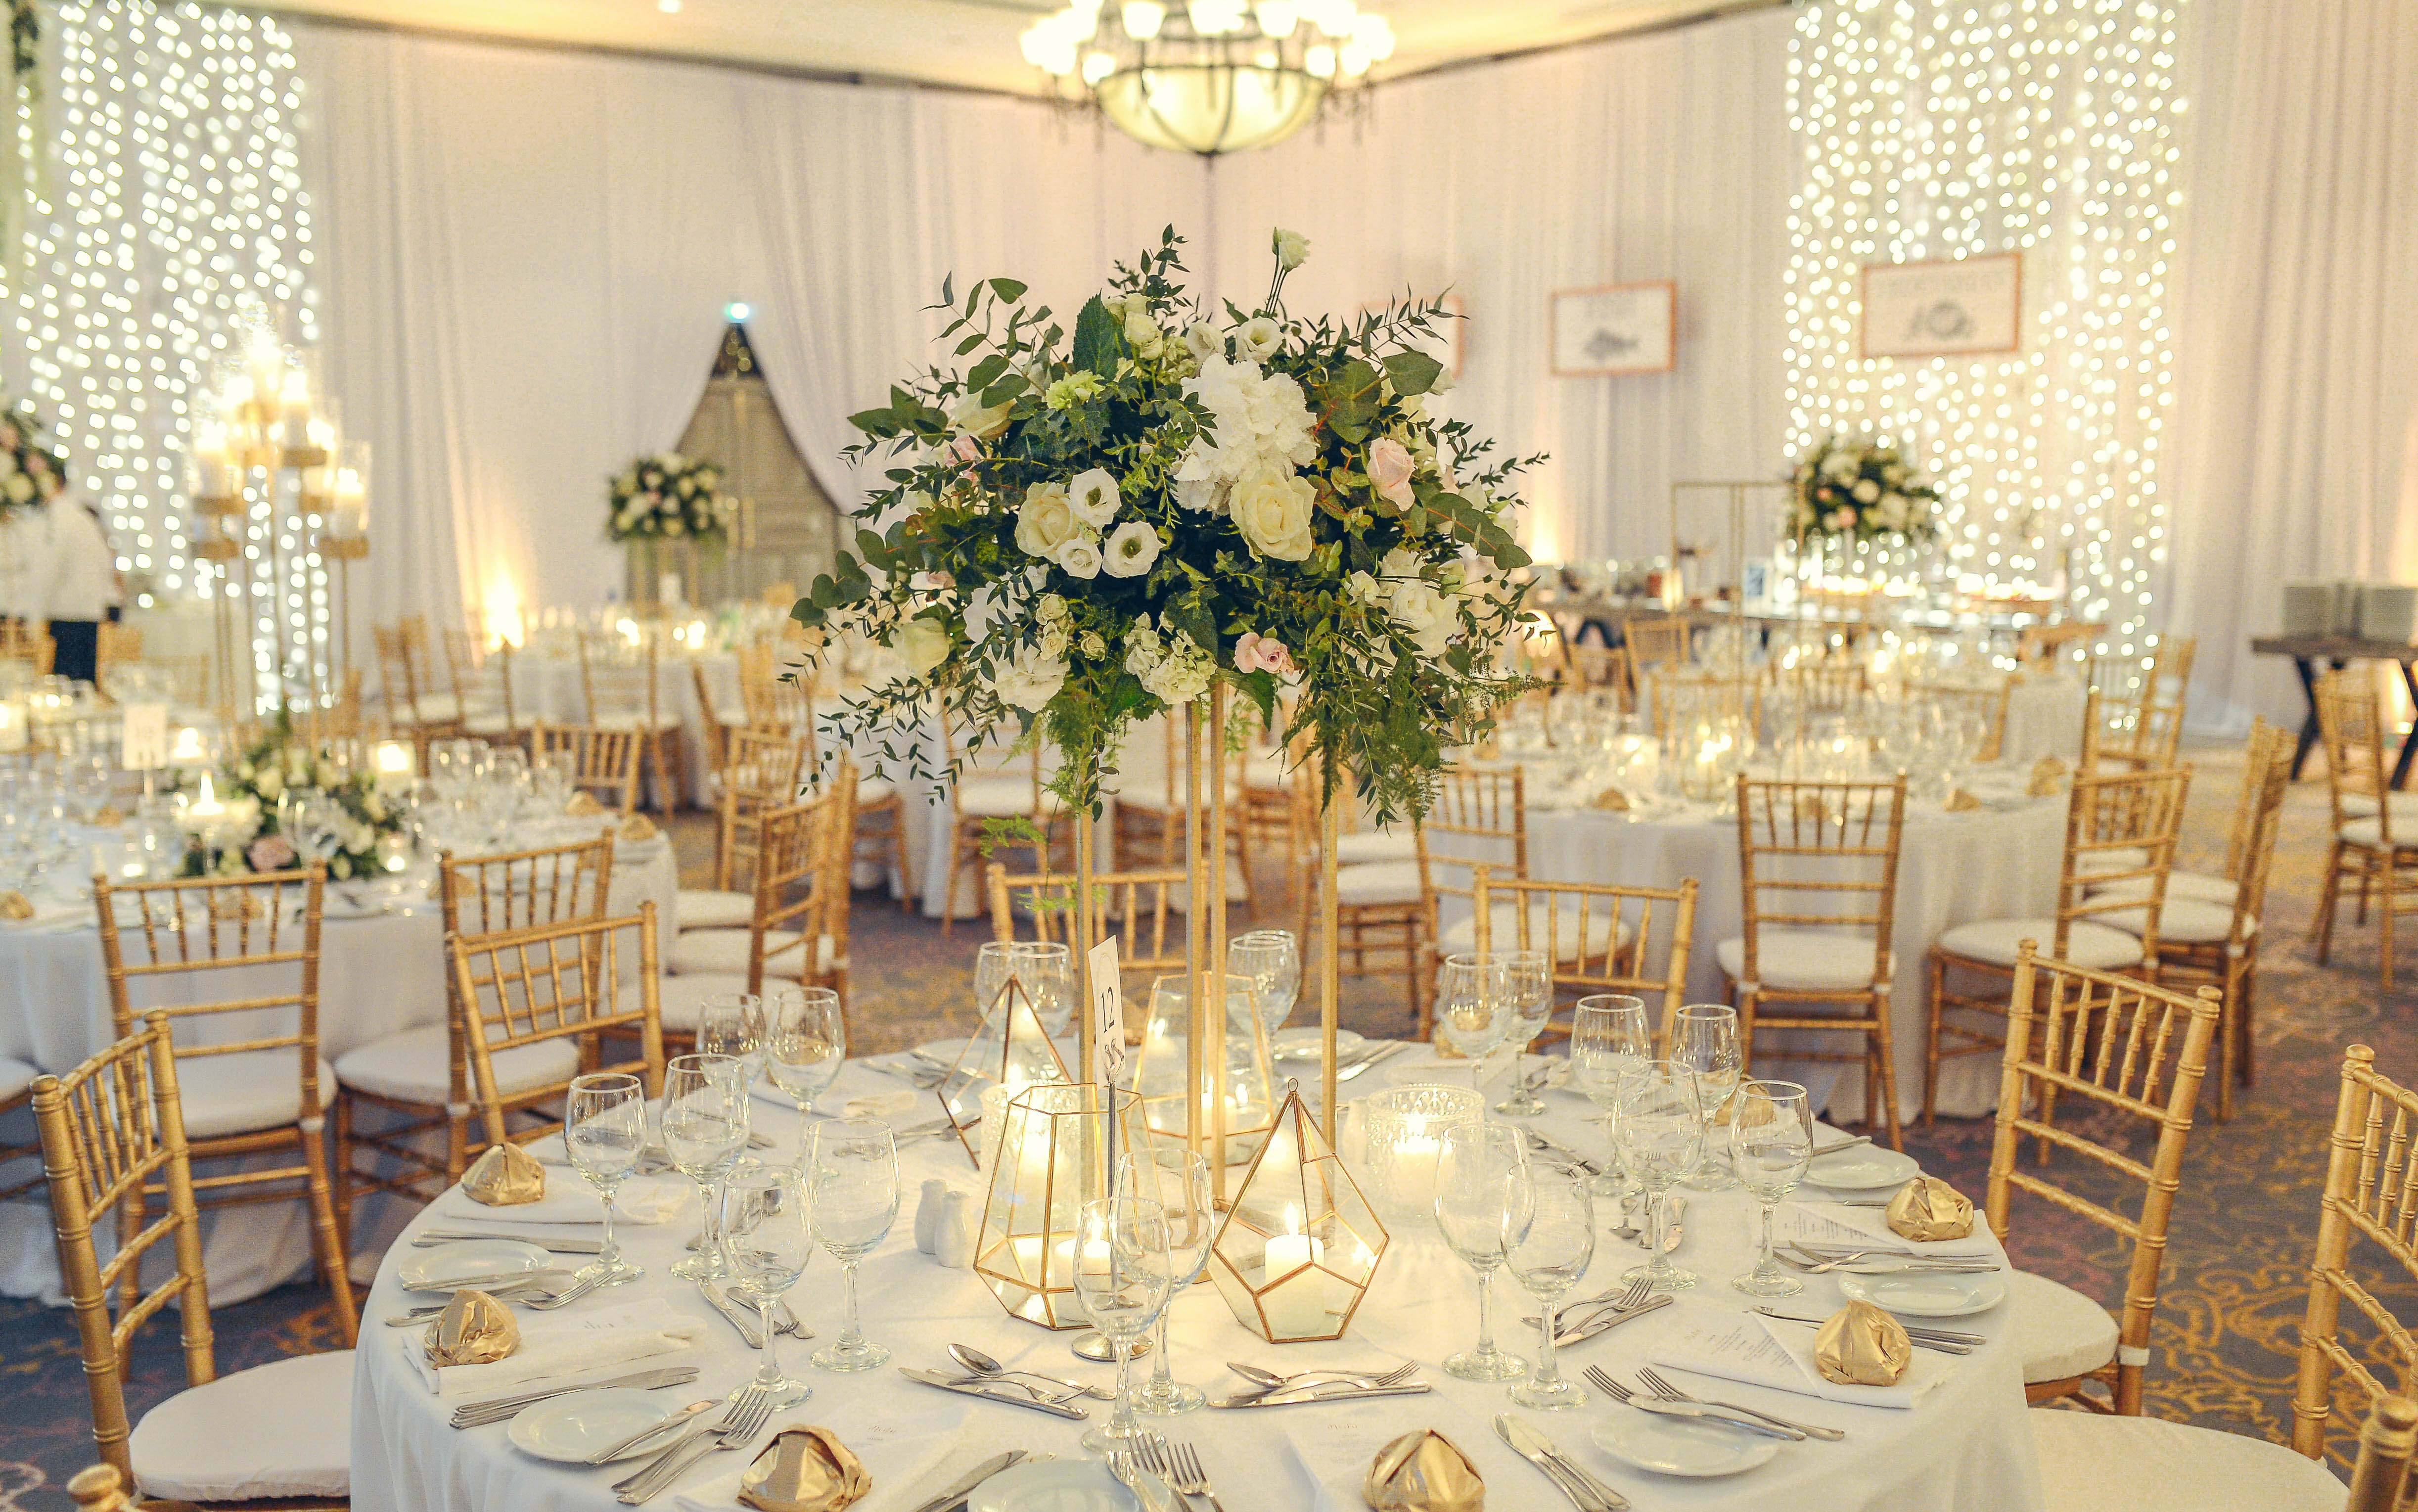 Event Setup with Table and Chairs and Flower Central Piece